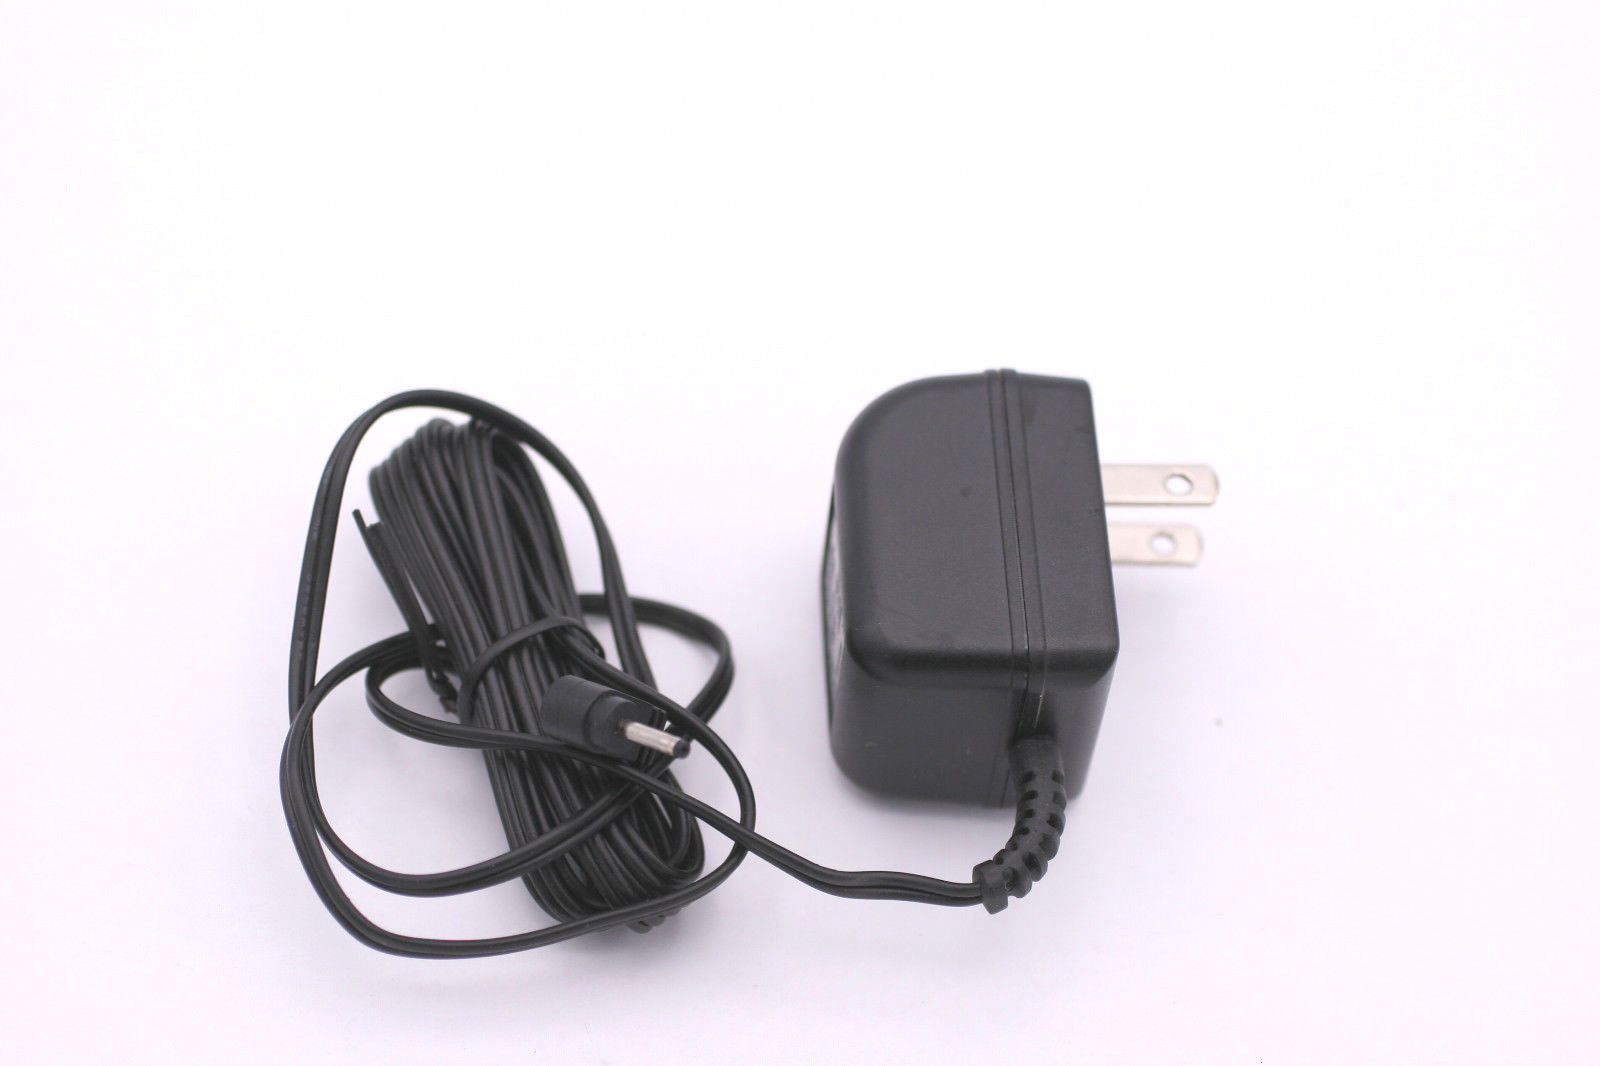 NEW 6V 300mA UA-0603 AC Adapter for Cordless